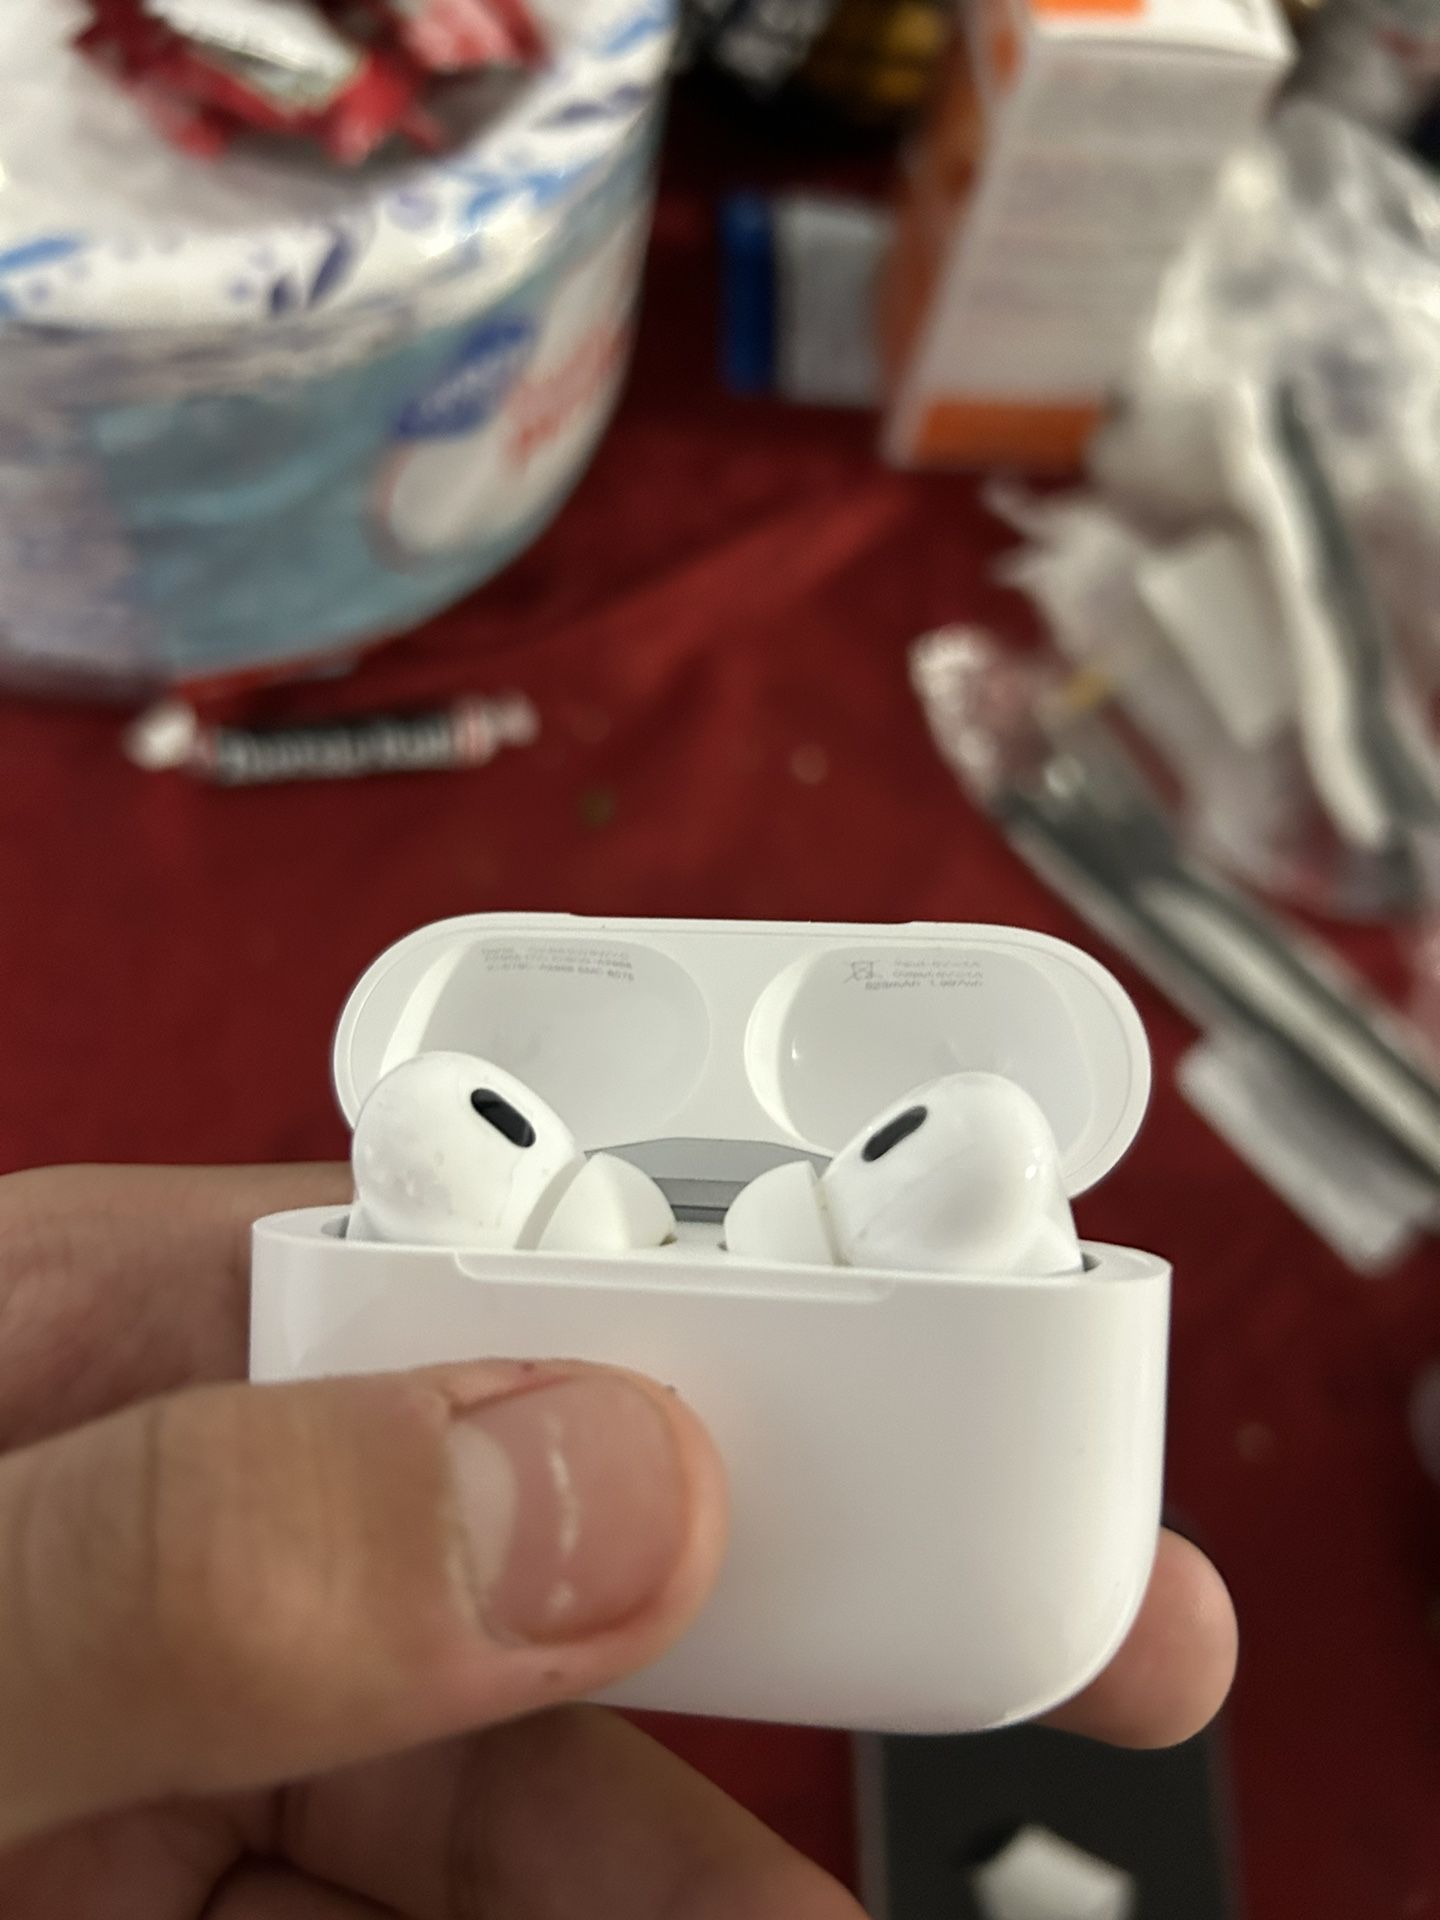 Airpods pro (2nd Generation)